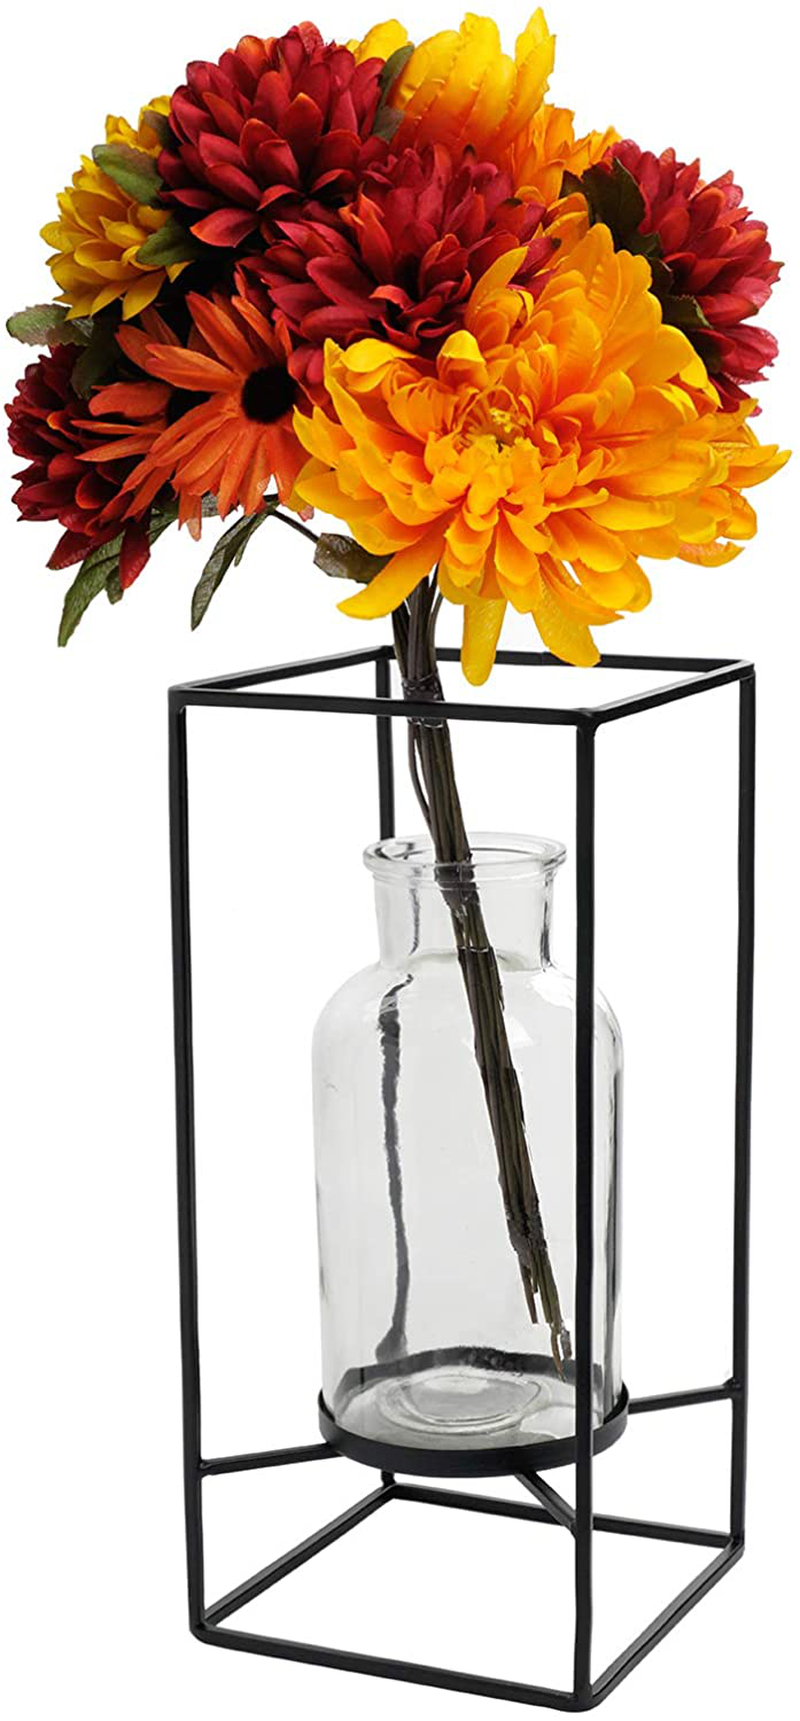 EXCELLO GLOBAL PRODUCTS Decorative Glass Vase with Metal Wire Stand: Clear Vase Decoration for Modern Home Decor (12.5" x 5.75") Home & Garden > Decor > Vases EXCELLO GLOBAL PRODUCTS Large (12.5"x 5.75"  